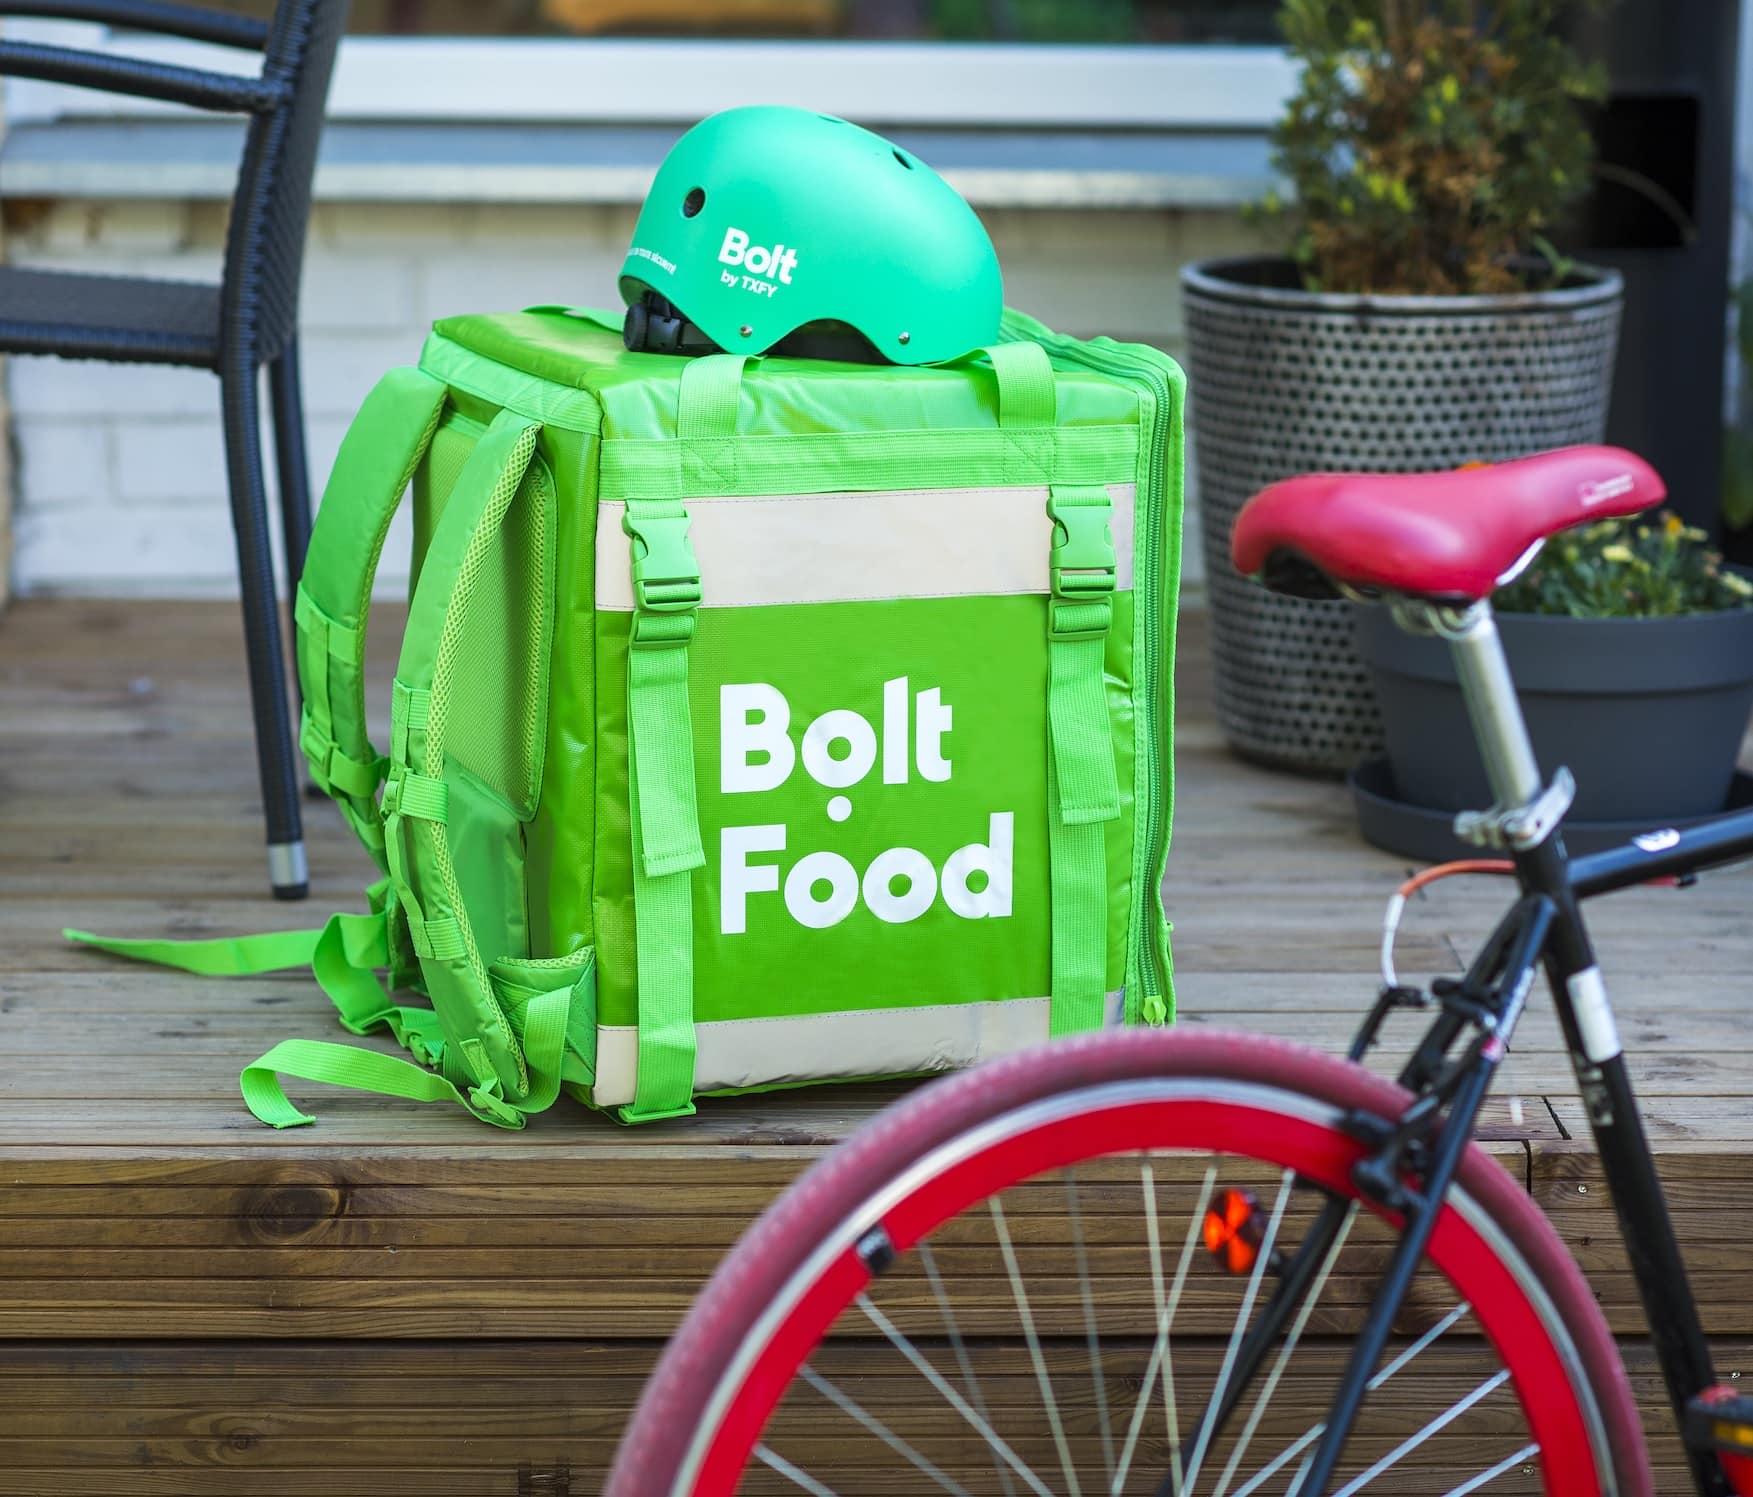 Post-COVID-19: Bolt Plans to Commence Food Delivery in Kenya